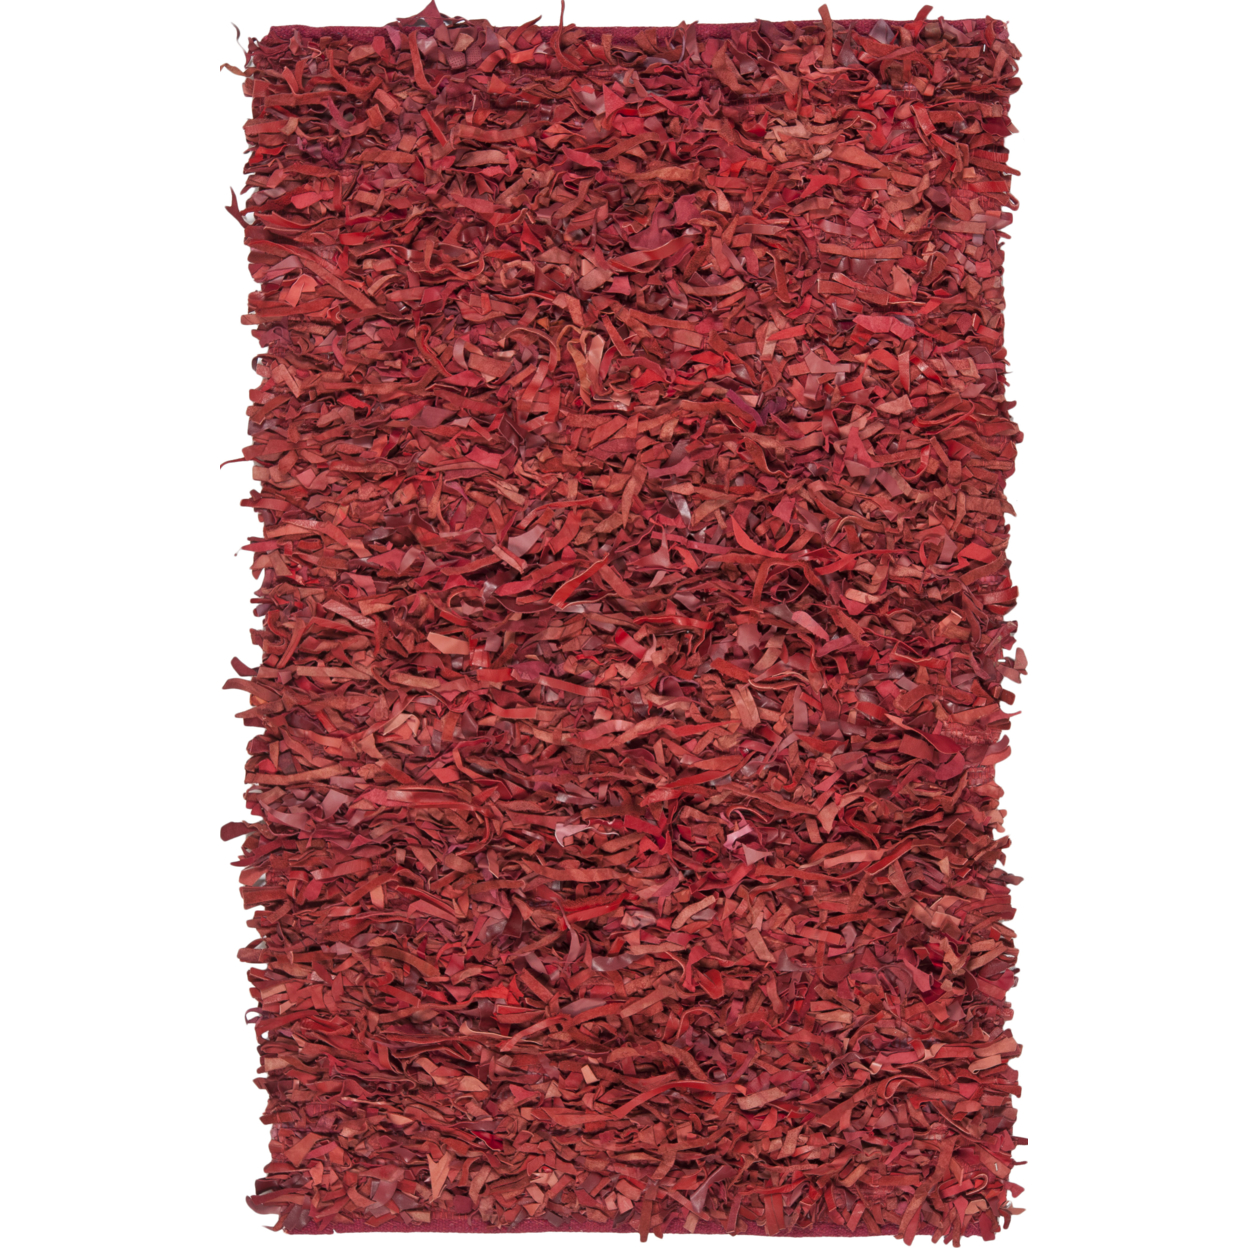 SAFAVIEH Leather Shag LSG511D Hand-knotted Red Rug - 6' Round